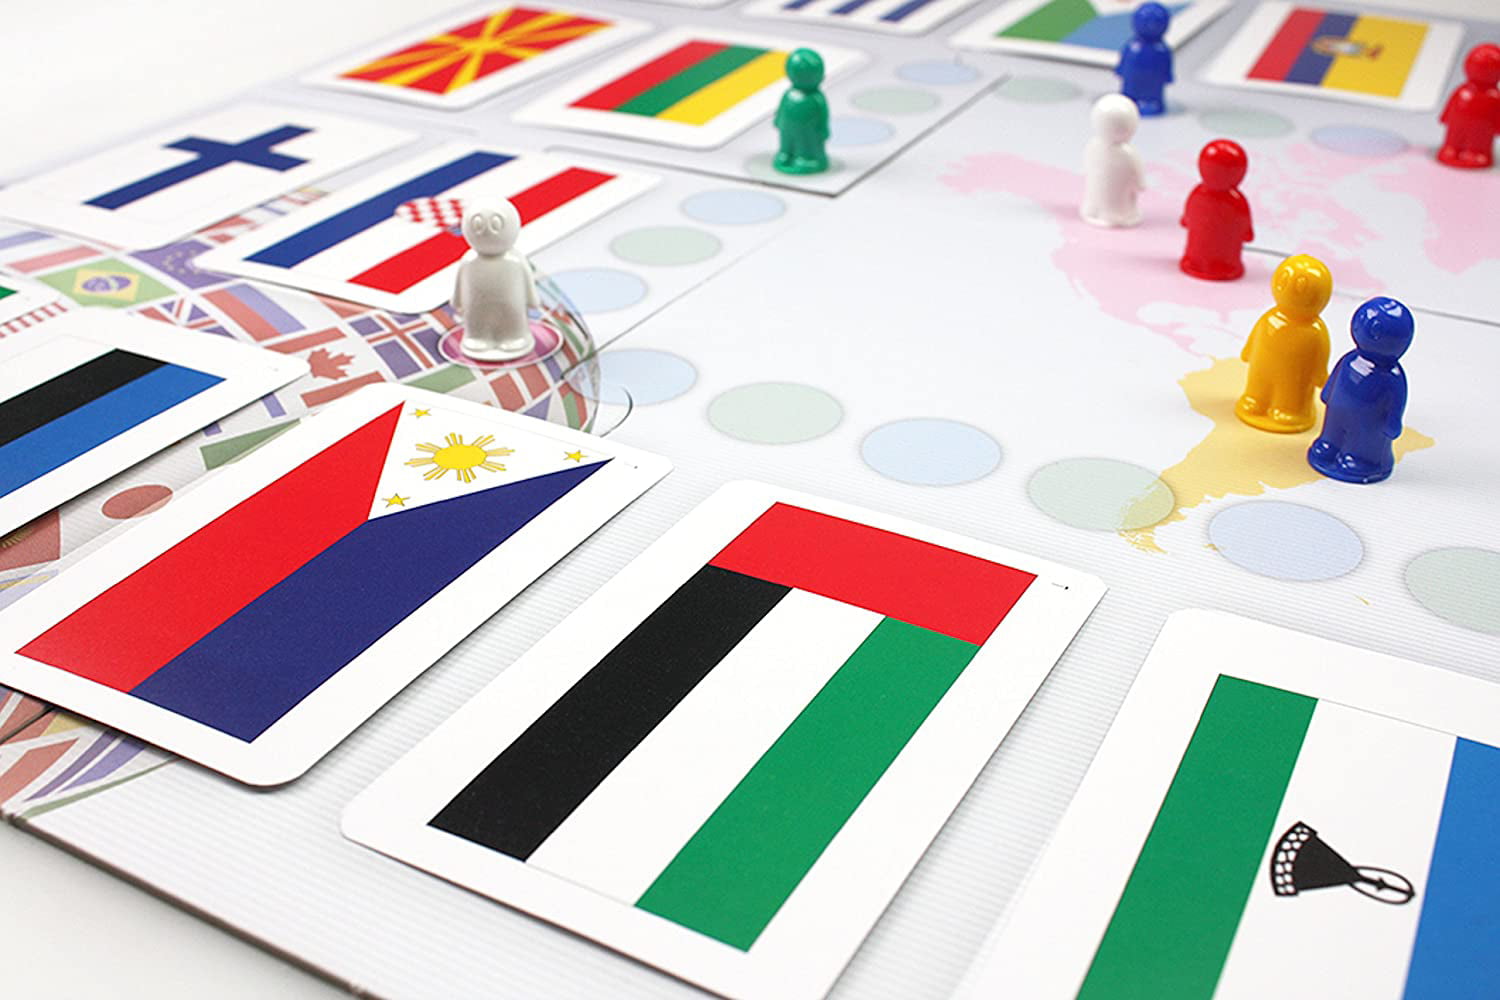 Flags of the World, Board Game